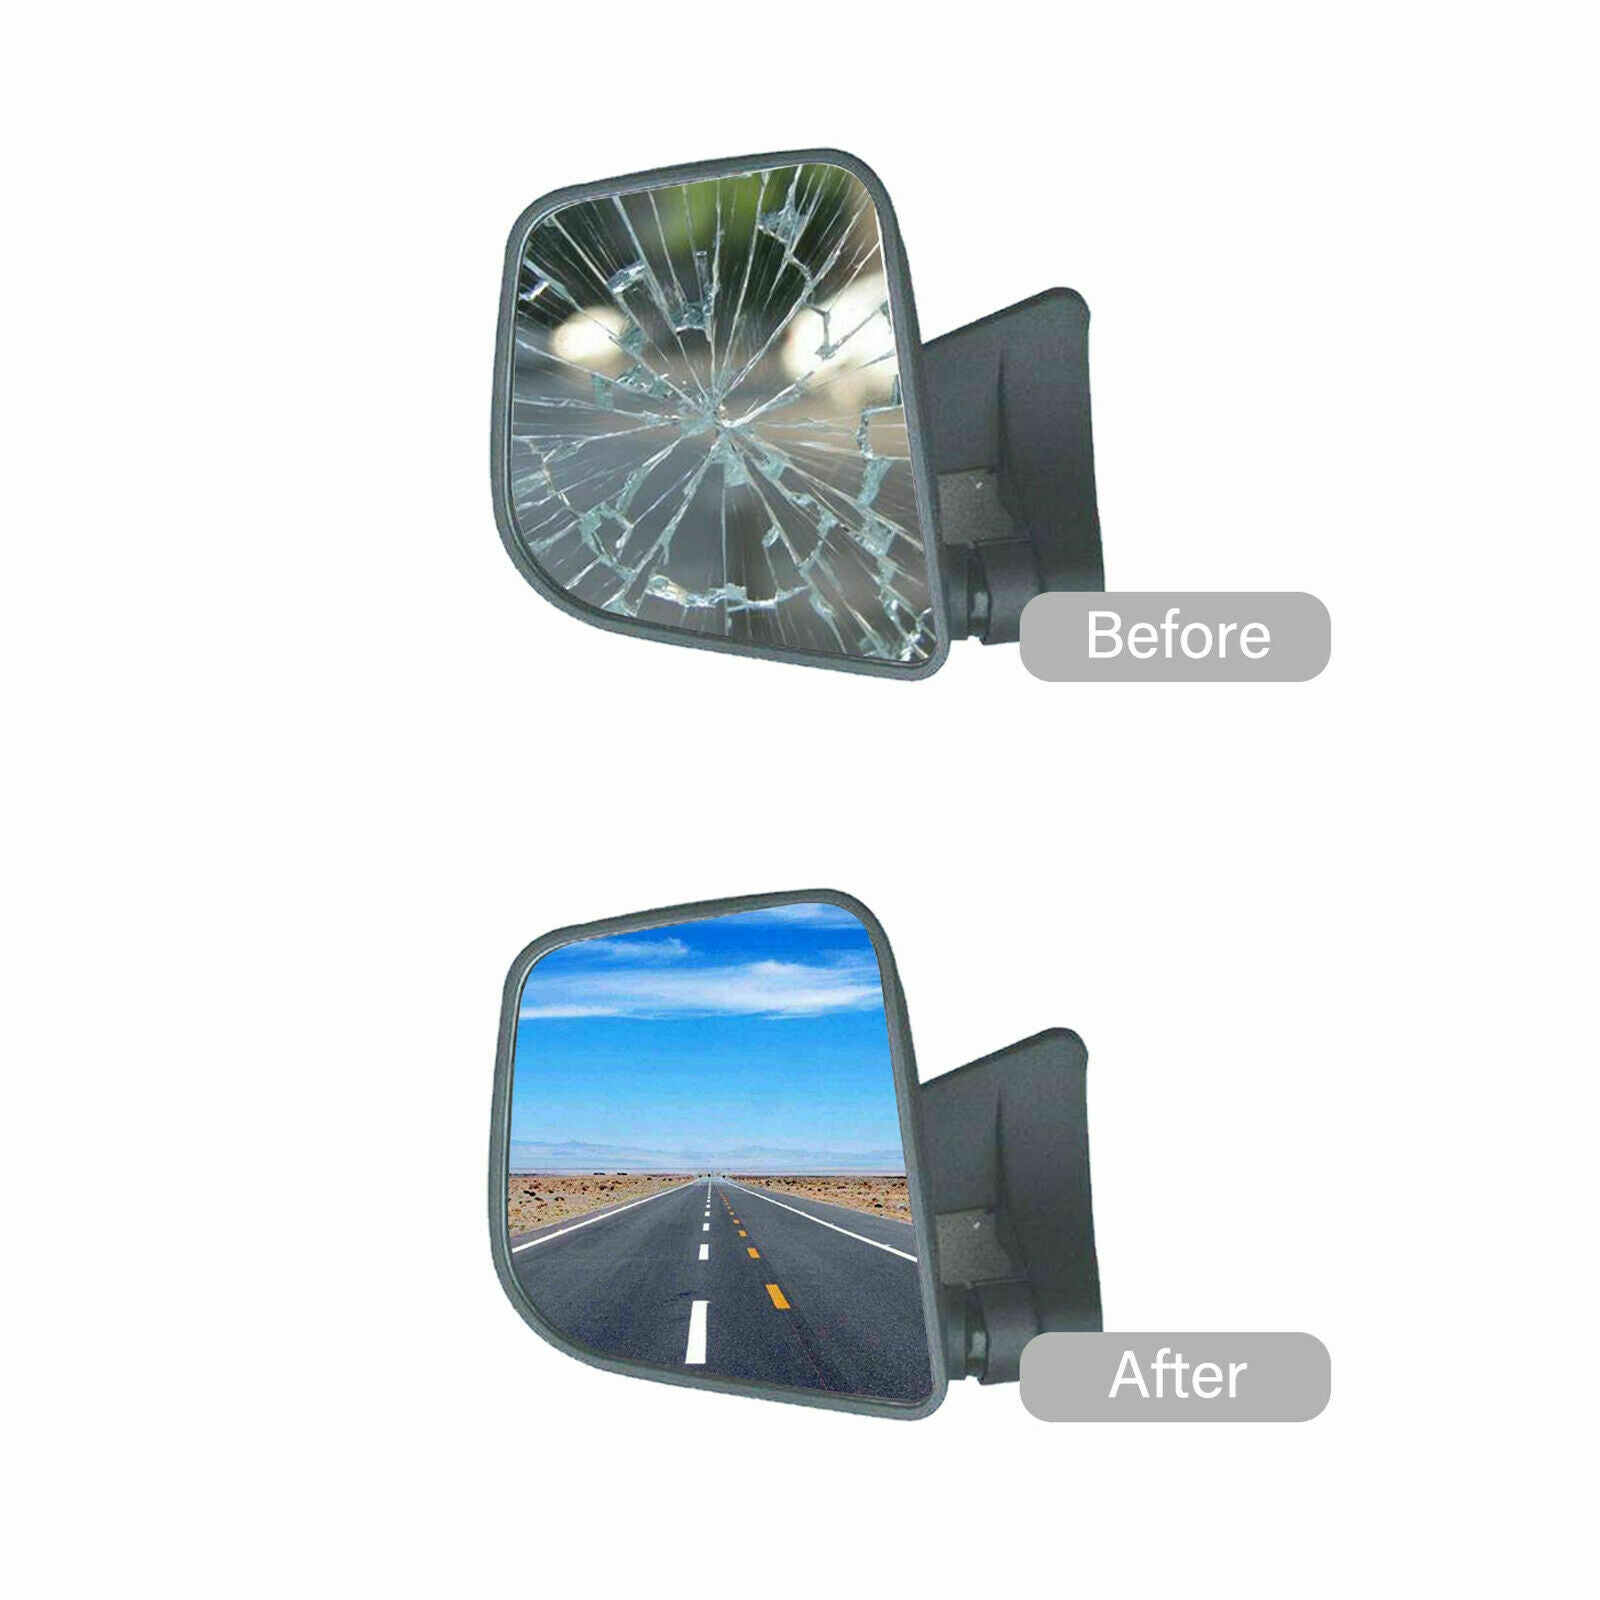 WLLW Towing Blind-Spot Mirror Glass for 1994-2009 Dodge Ram 1500 2500 3500, Driver Left Side LH/Passenger Right Side RH/The Both Sides Convex M-0015